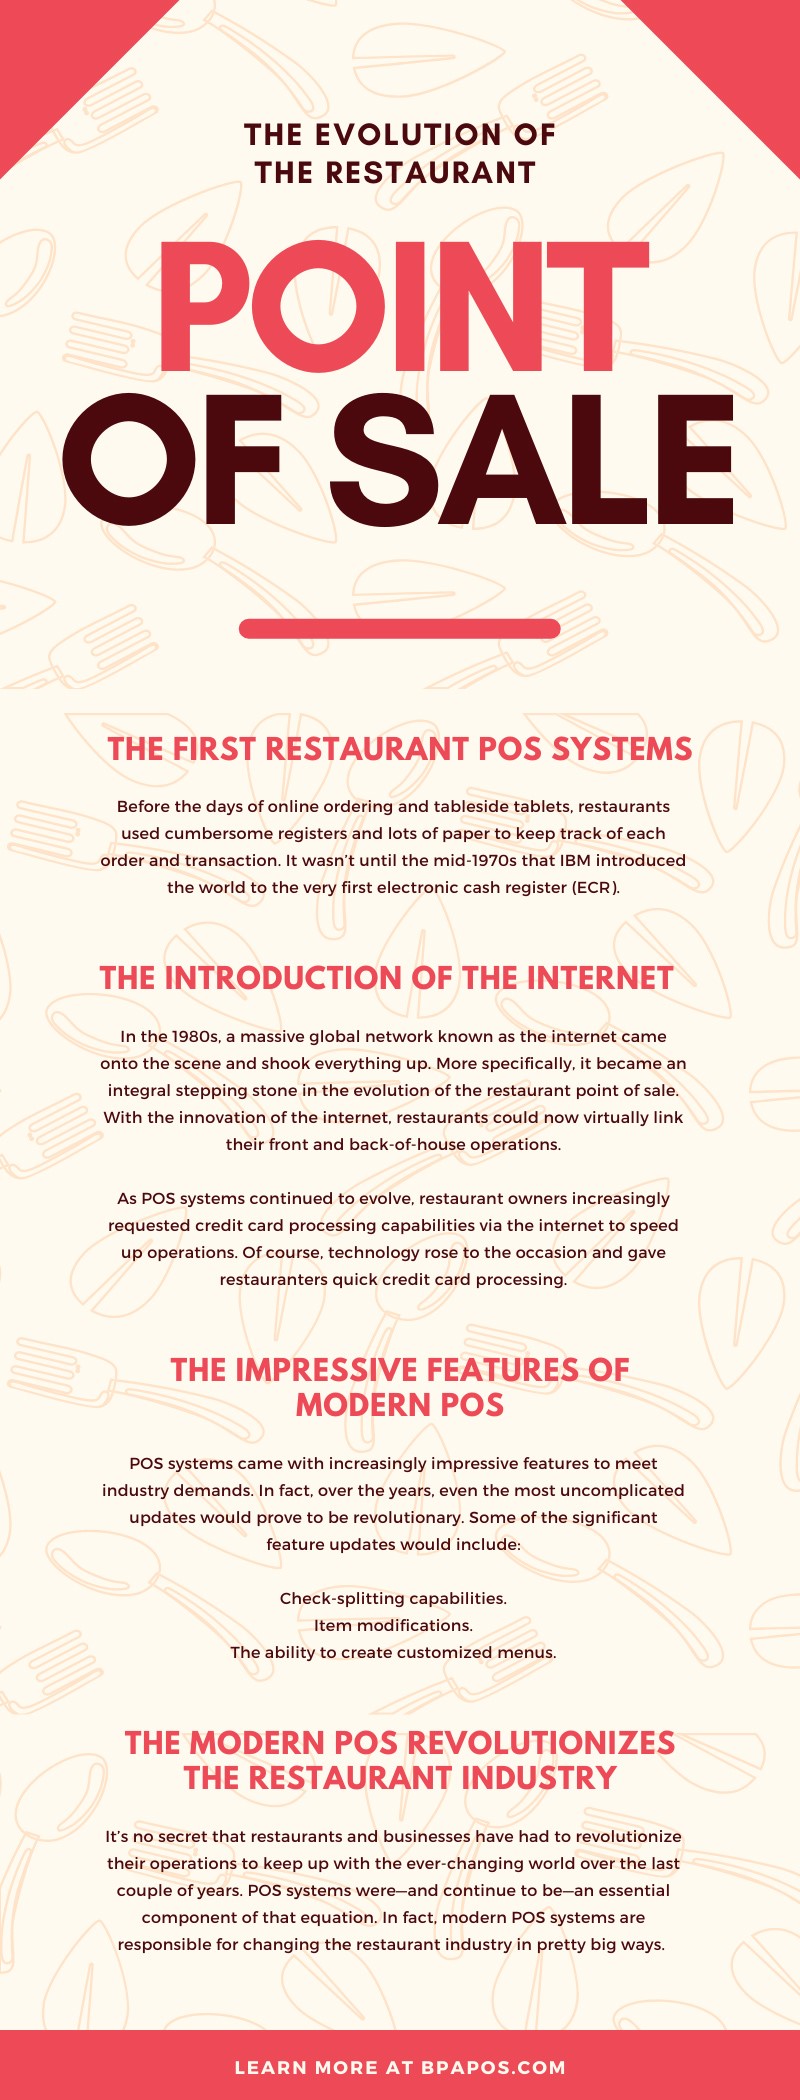 Evolution of Point of Sale Infographic